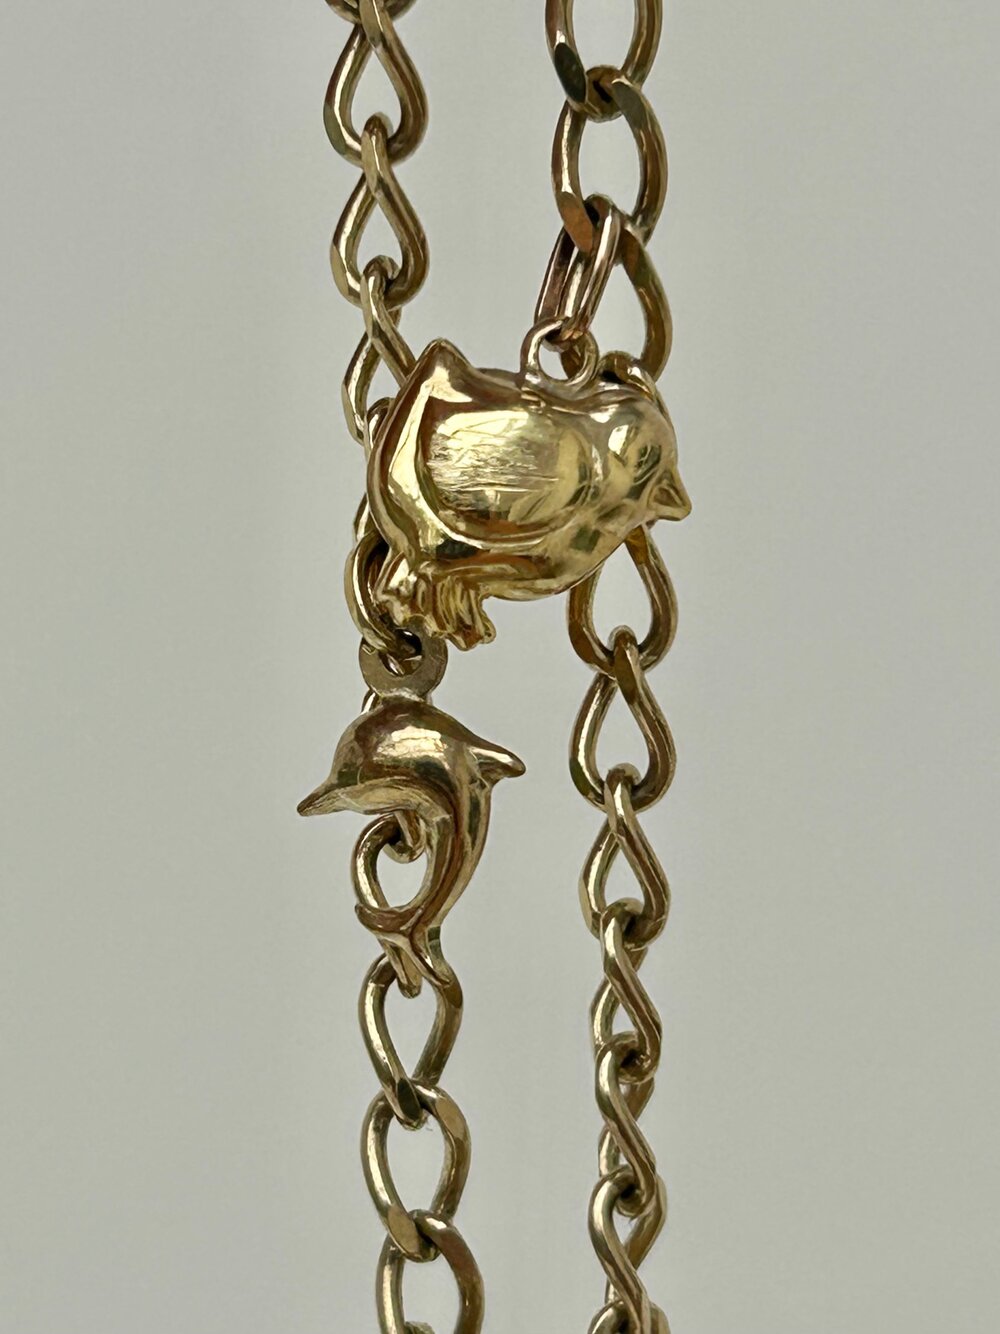 9ct Rose Gold and 9ct Yellow Gold Charm Bracelets (Bracelet type: Yellow Gold Charm Bracelet)